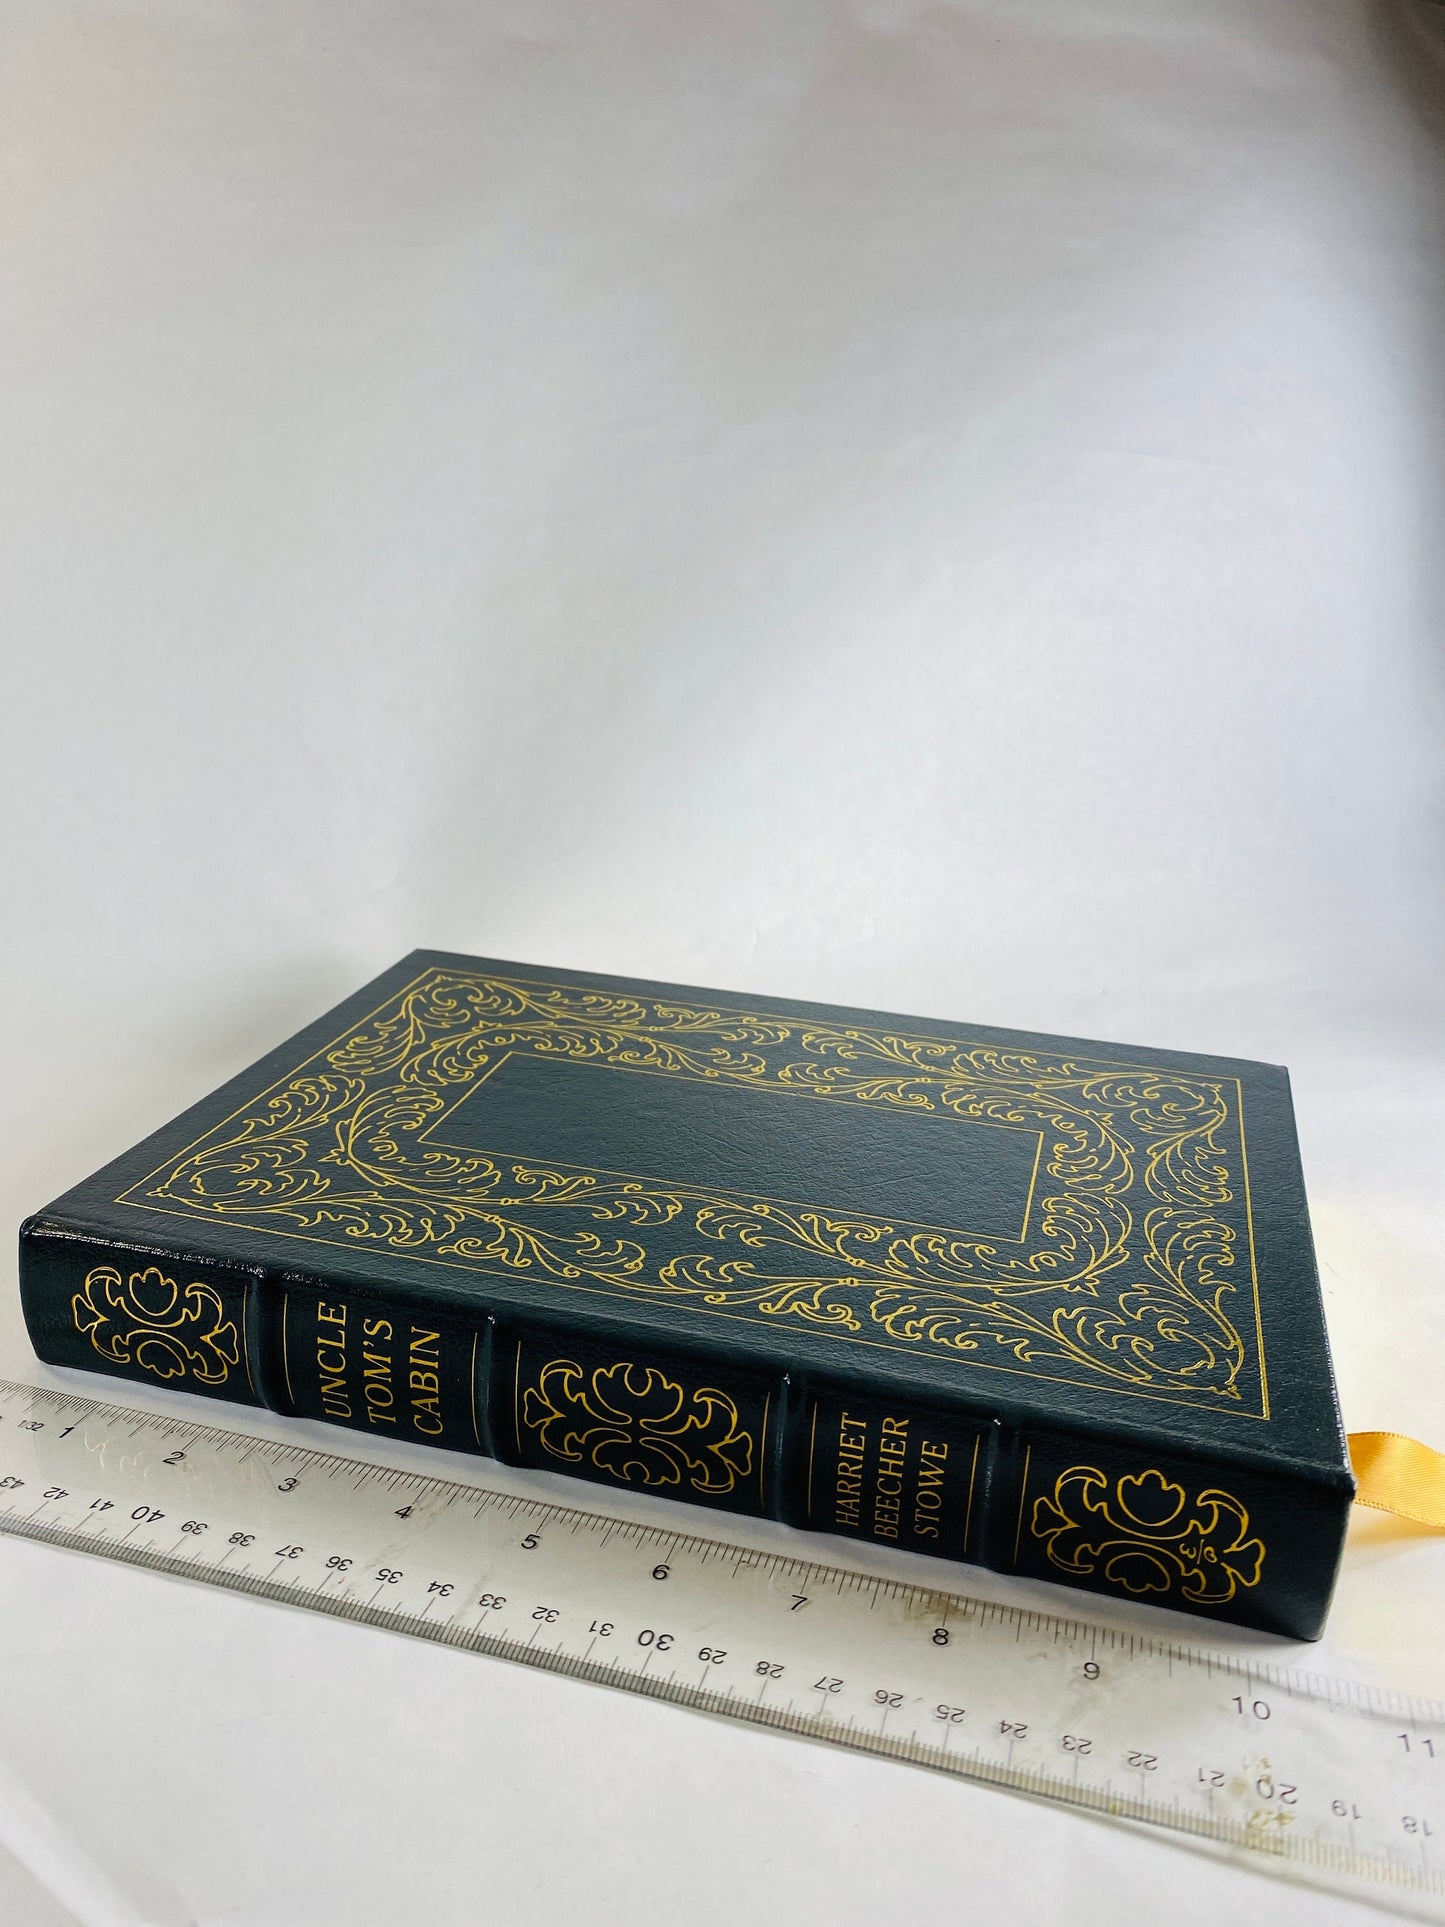 Uncle Tom's Cabin by Harriet Beecher Stowe Life Among the Lowly vintage leather Easton Press Anti-slavery book circa 1979 Civil War